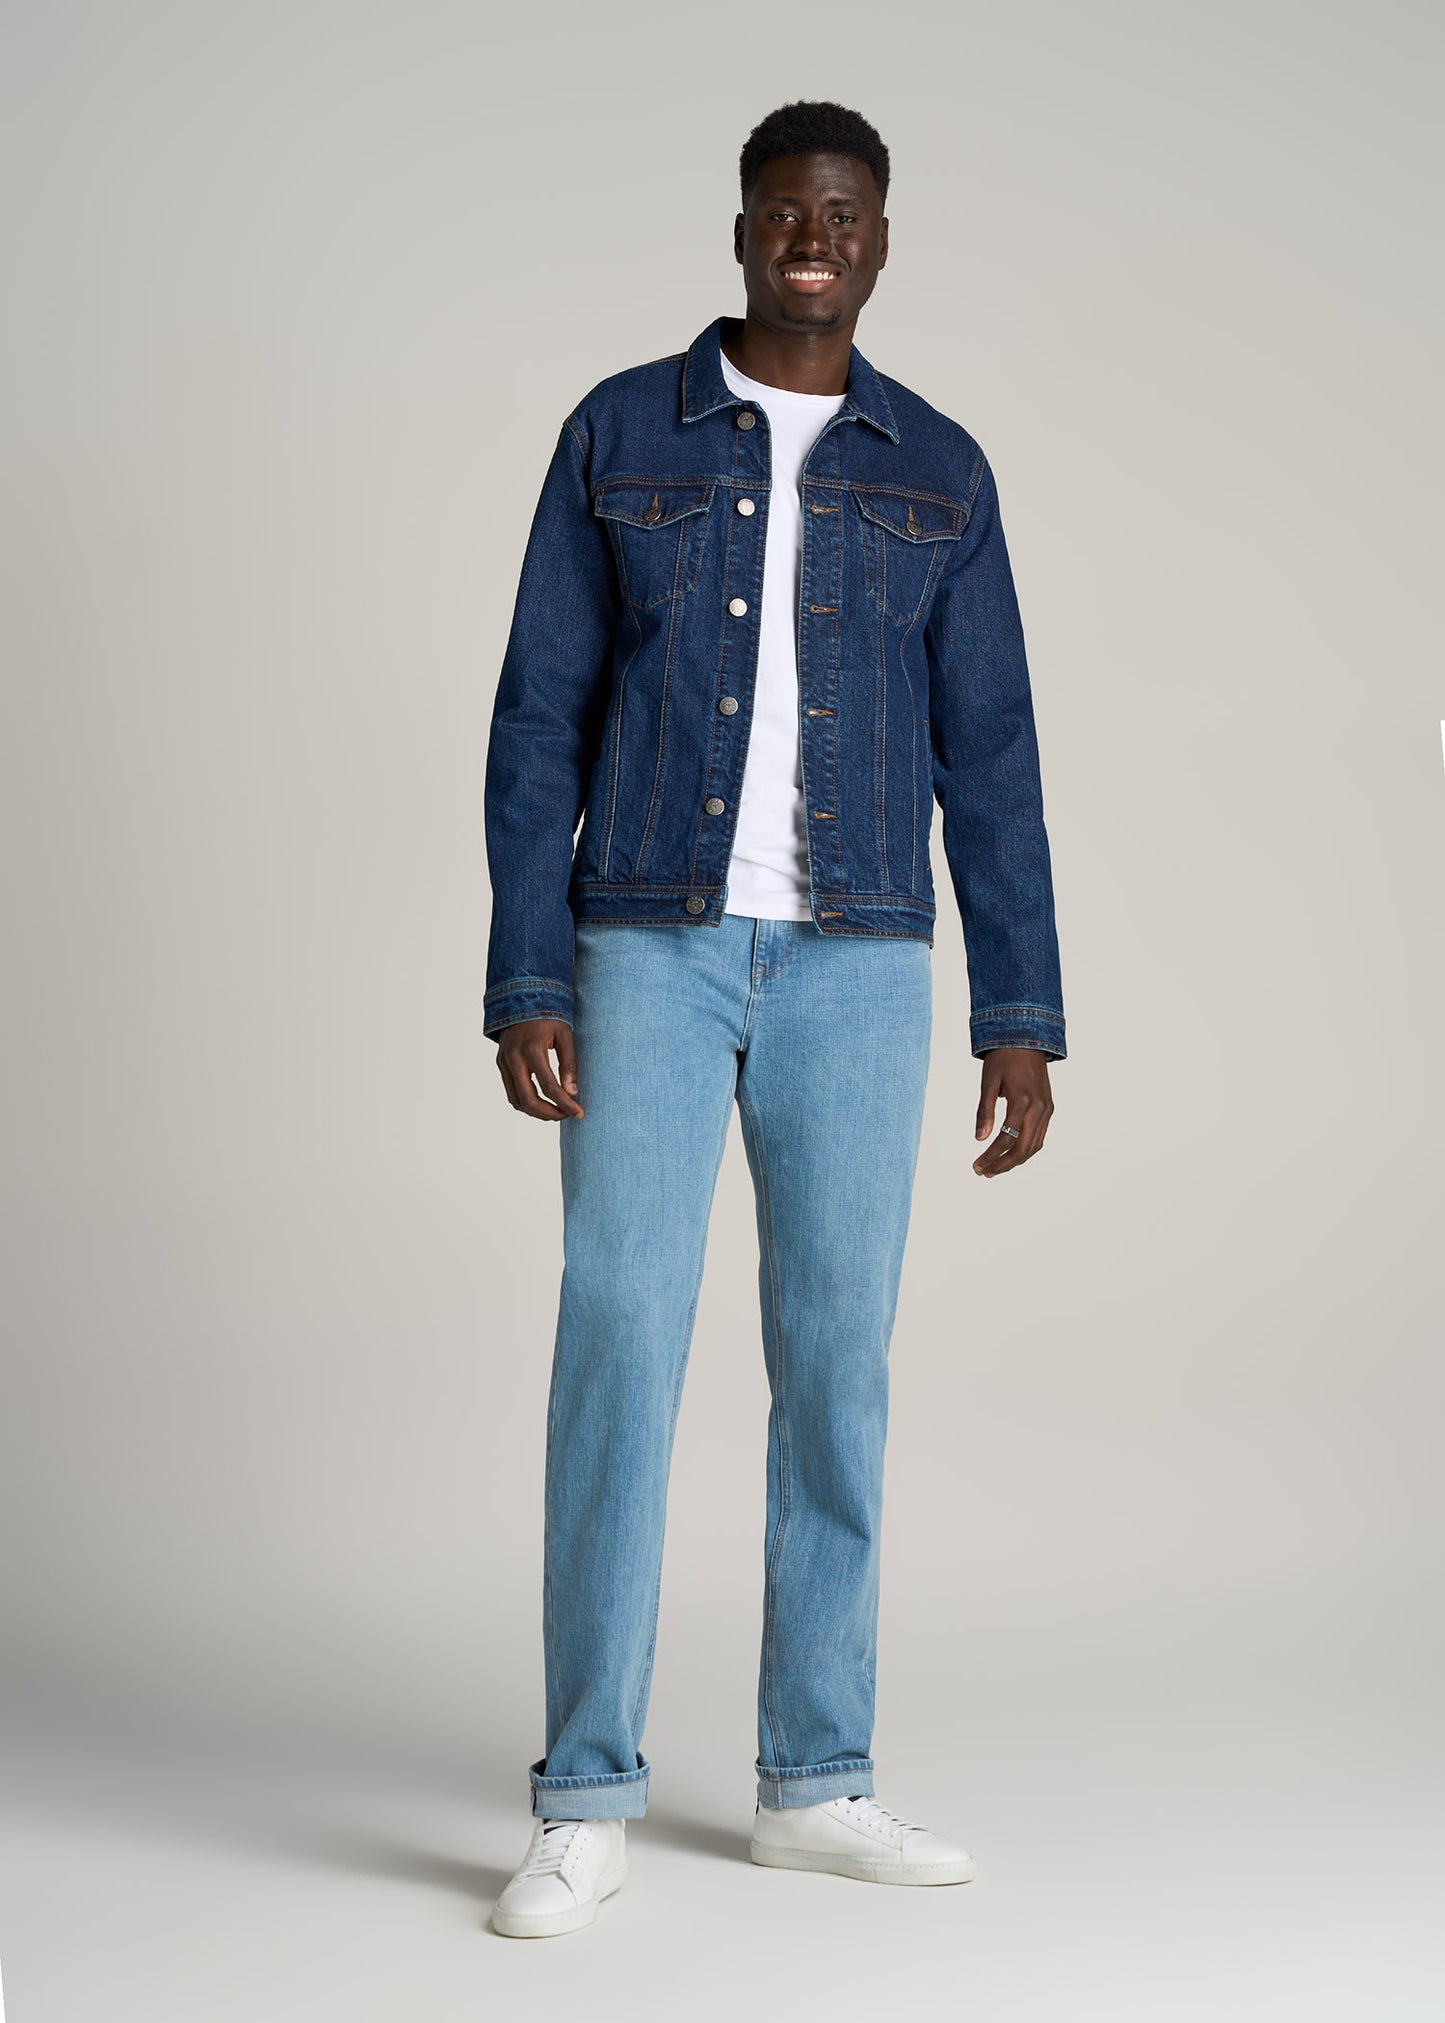 LJ&S STRAIGHT LEG Jeans for Tall Men in Heritage Faded